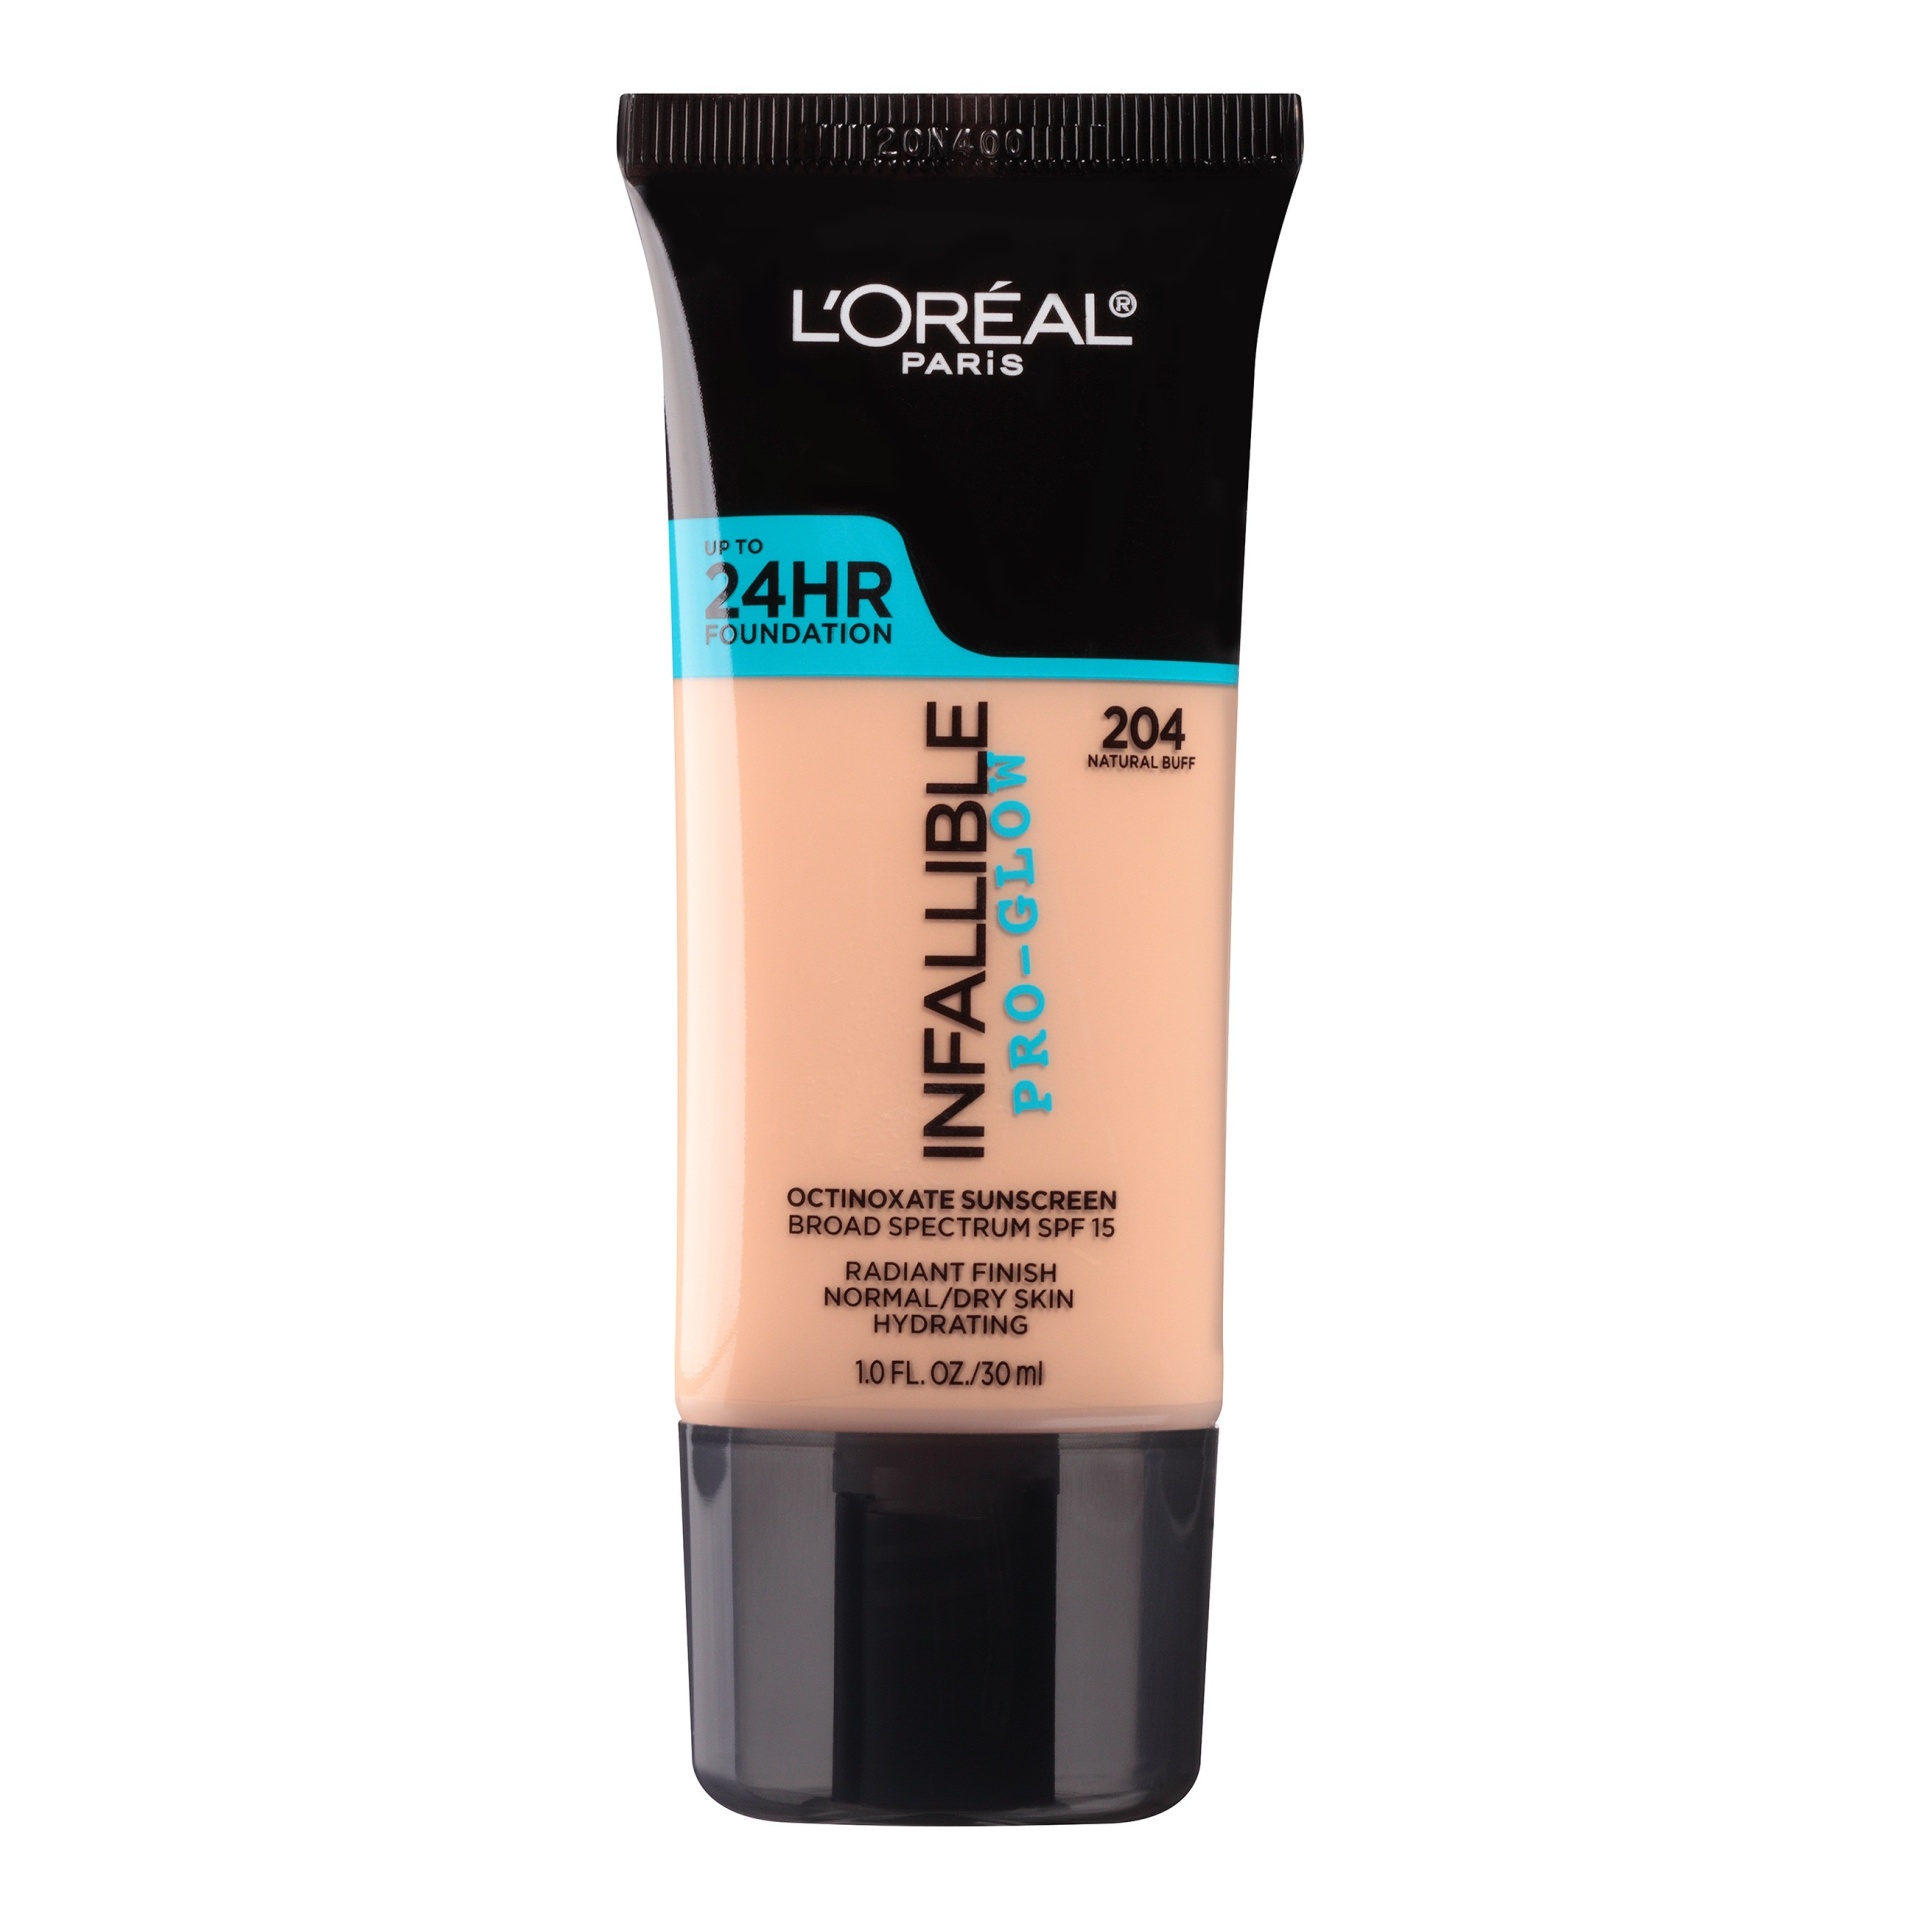 slide 1 of 3, L'Oreal Paris Infallible Pro-Glow Foundation Normal/Dry Skin with SPF 15 - 204 Natural Buff - 1 fl oz, 1 fl oz